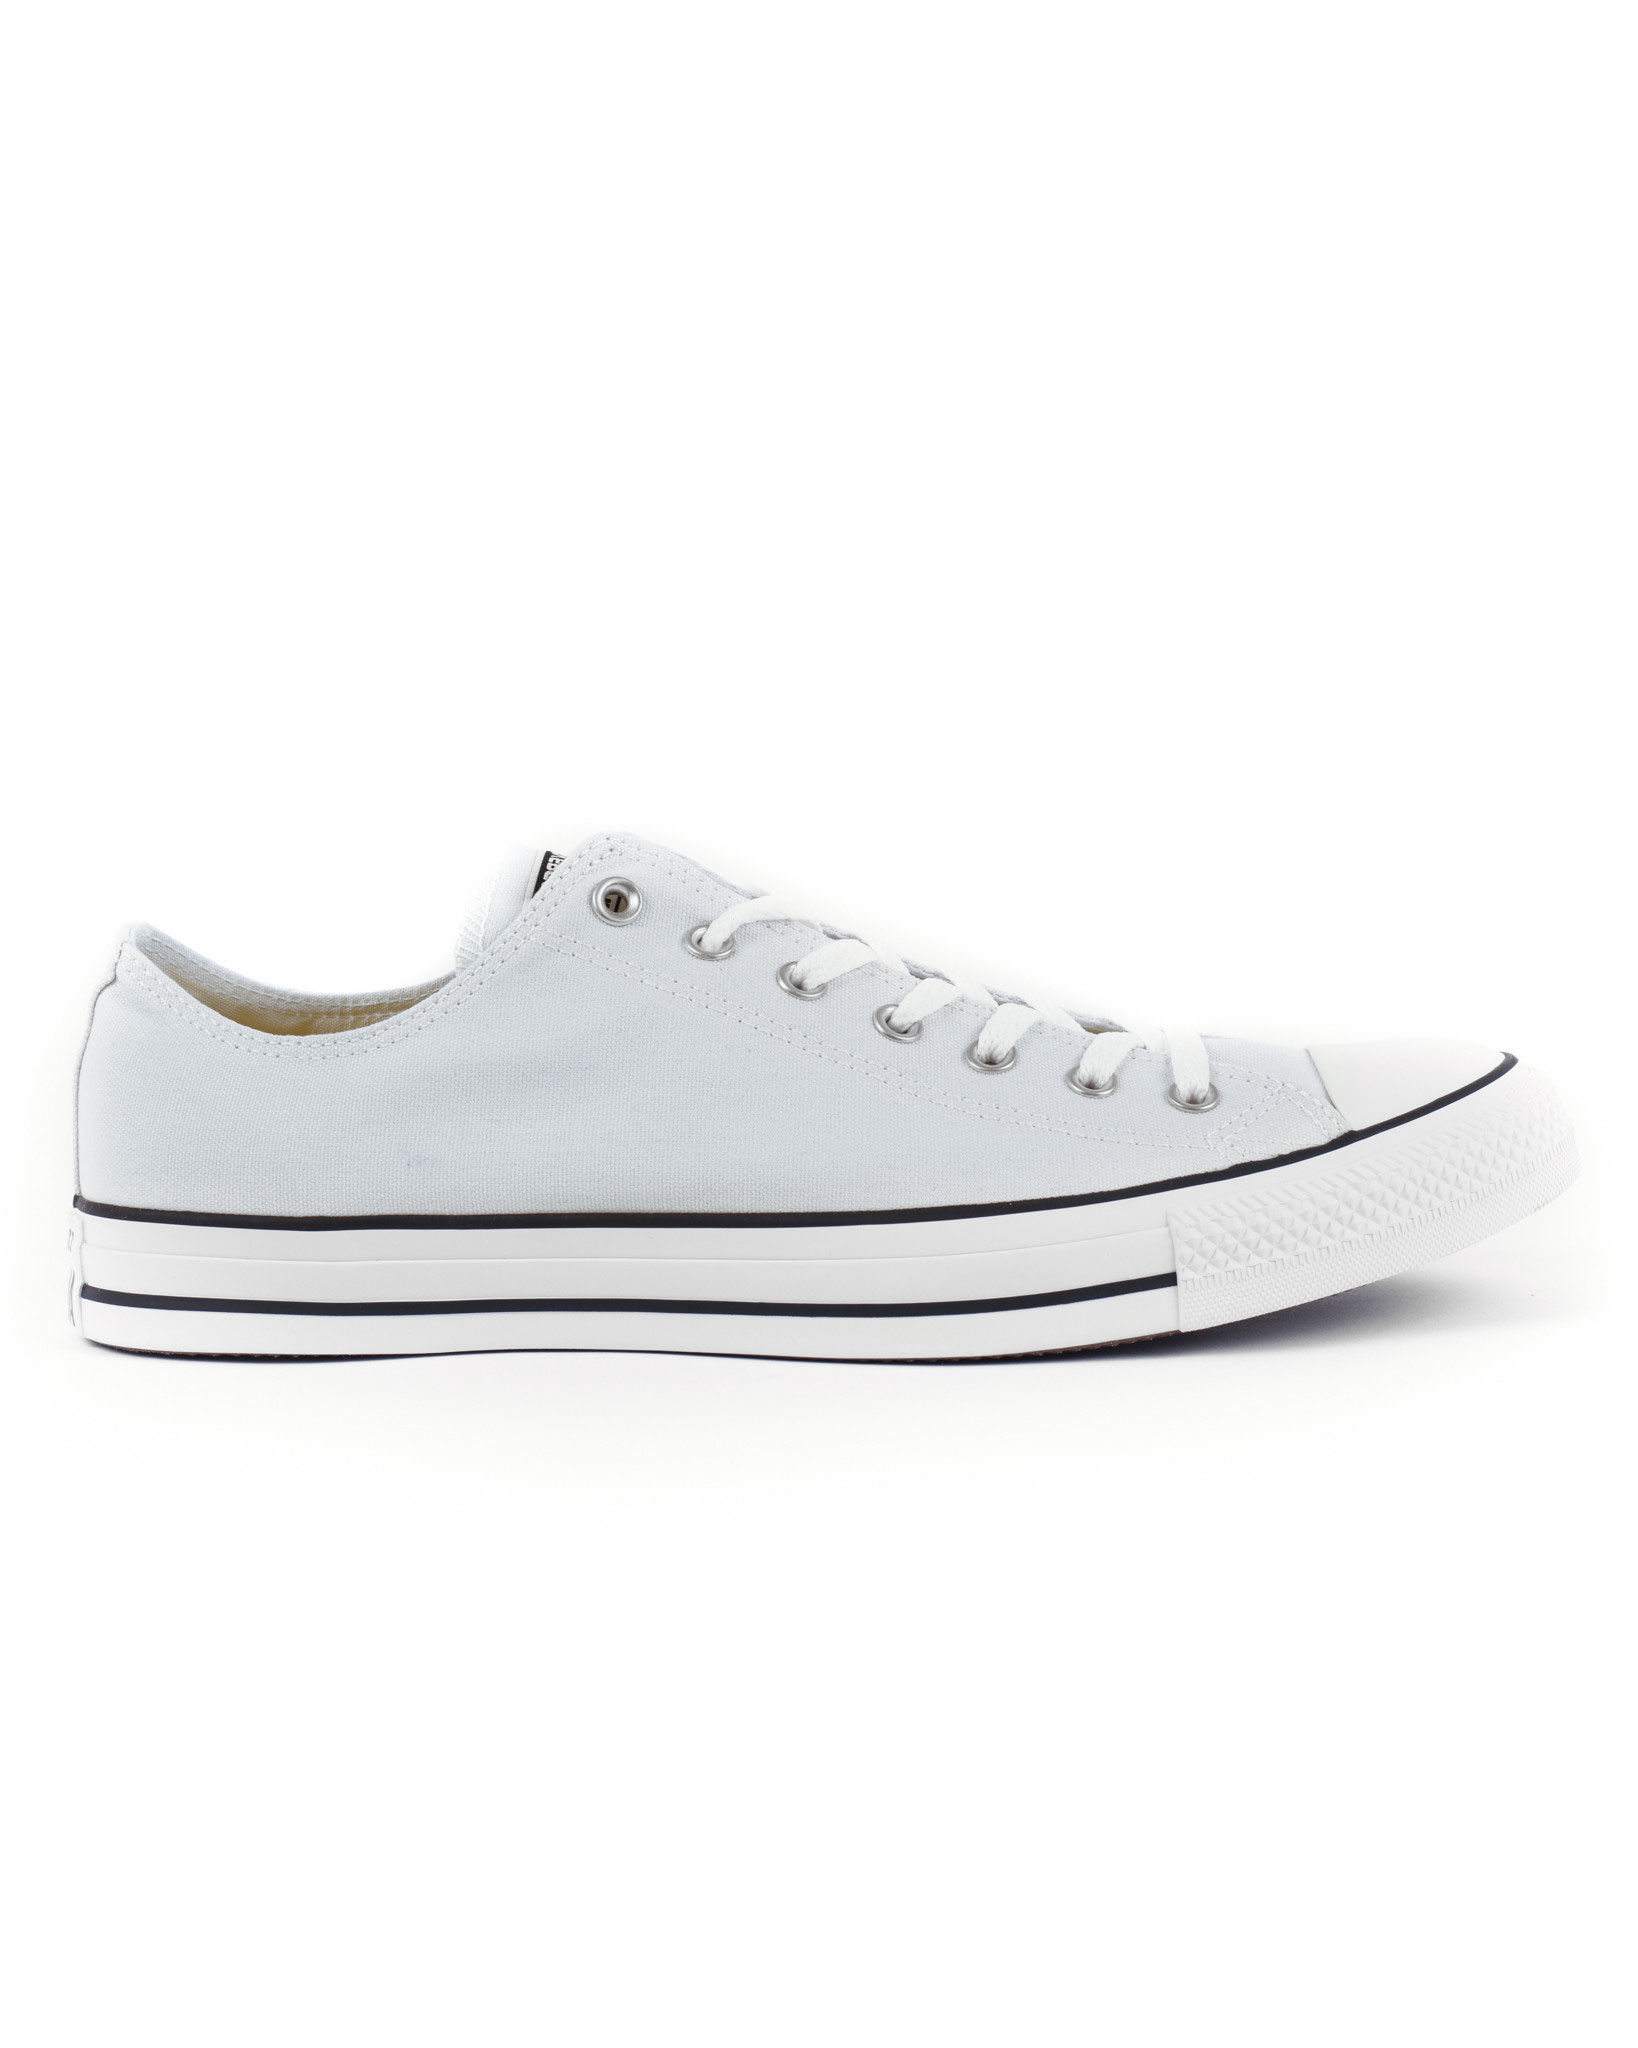 Converse Chuck Taylor All Star Ox (mouse)